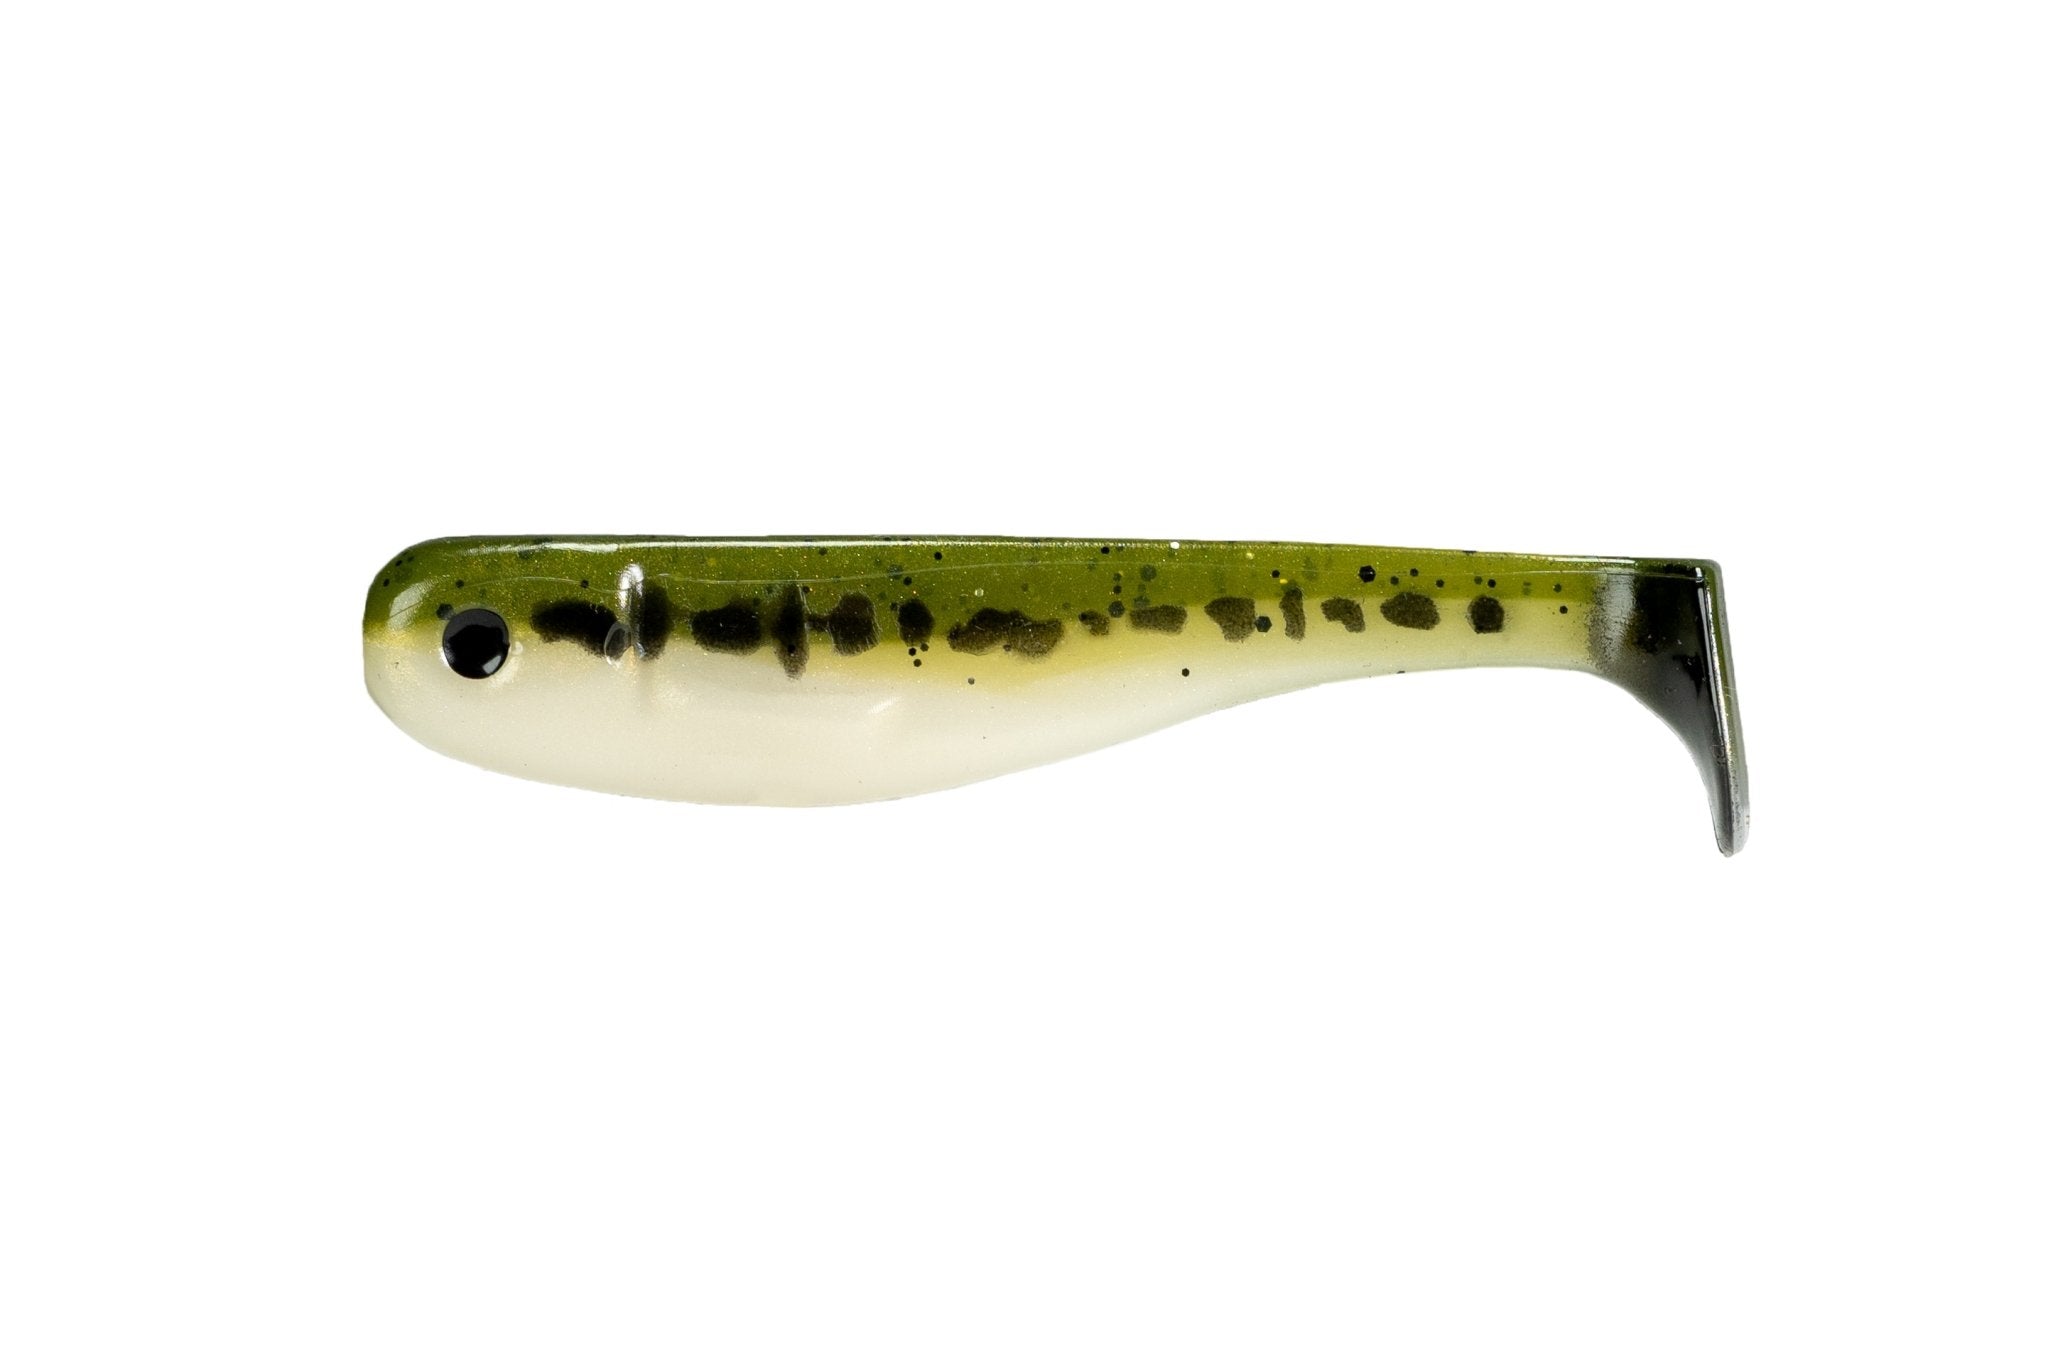 Big Joshy Swimbaits Fishing Tackle & Gear for Sale Online, Fishing Rods,  Reels, Baits and More